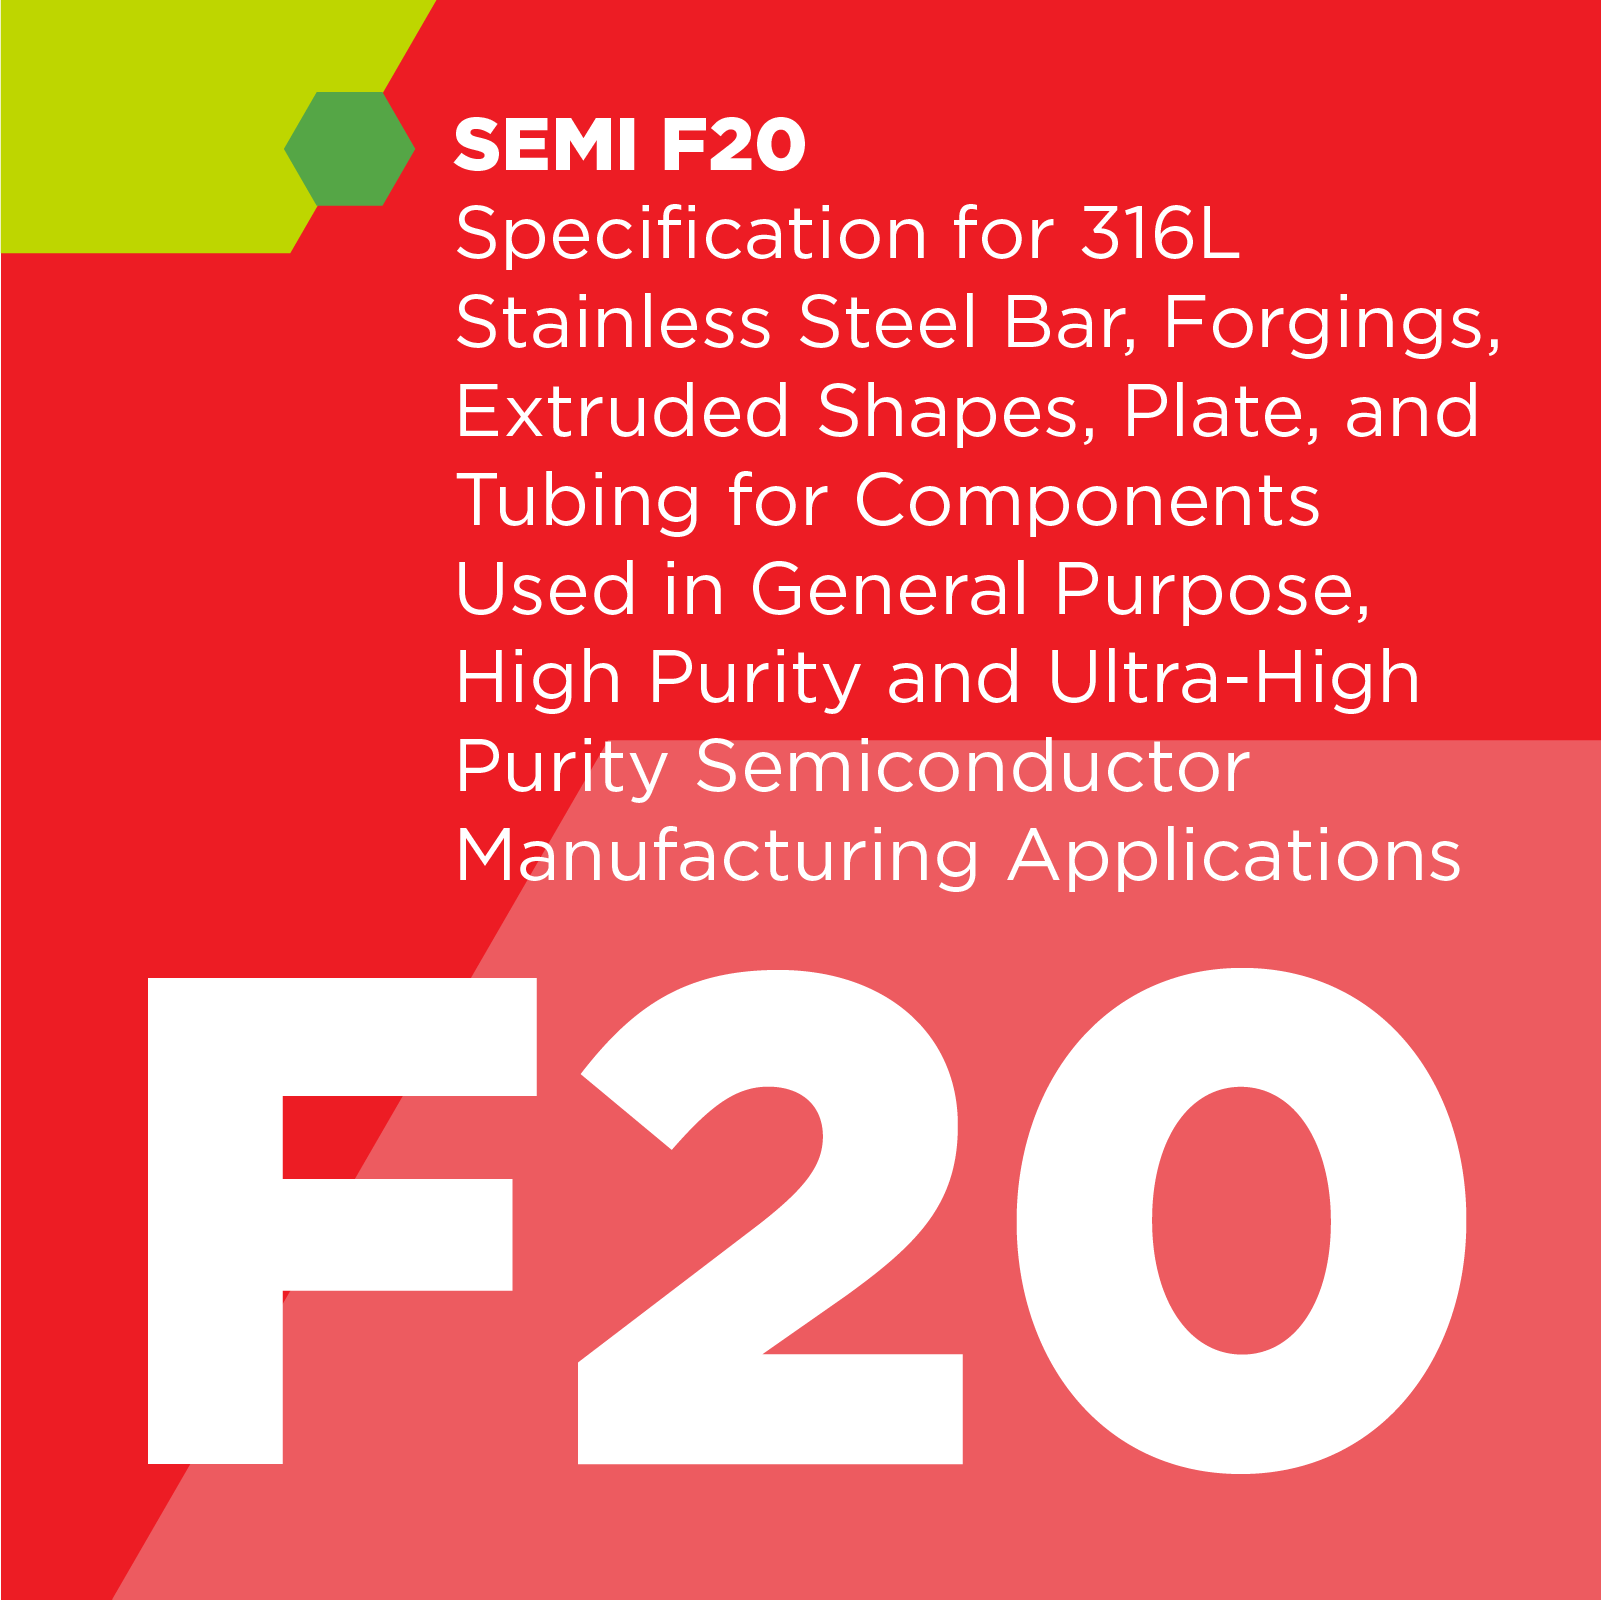 F02000 - SEMI F20 - Specification for 316L Stainless Steel Bar, Forgings, Extruded Shapes, Plate, and Tubing for Components Used in General Purpose, High Purity and Ultra-High Purity Semiconductor Manufacturing Applications